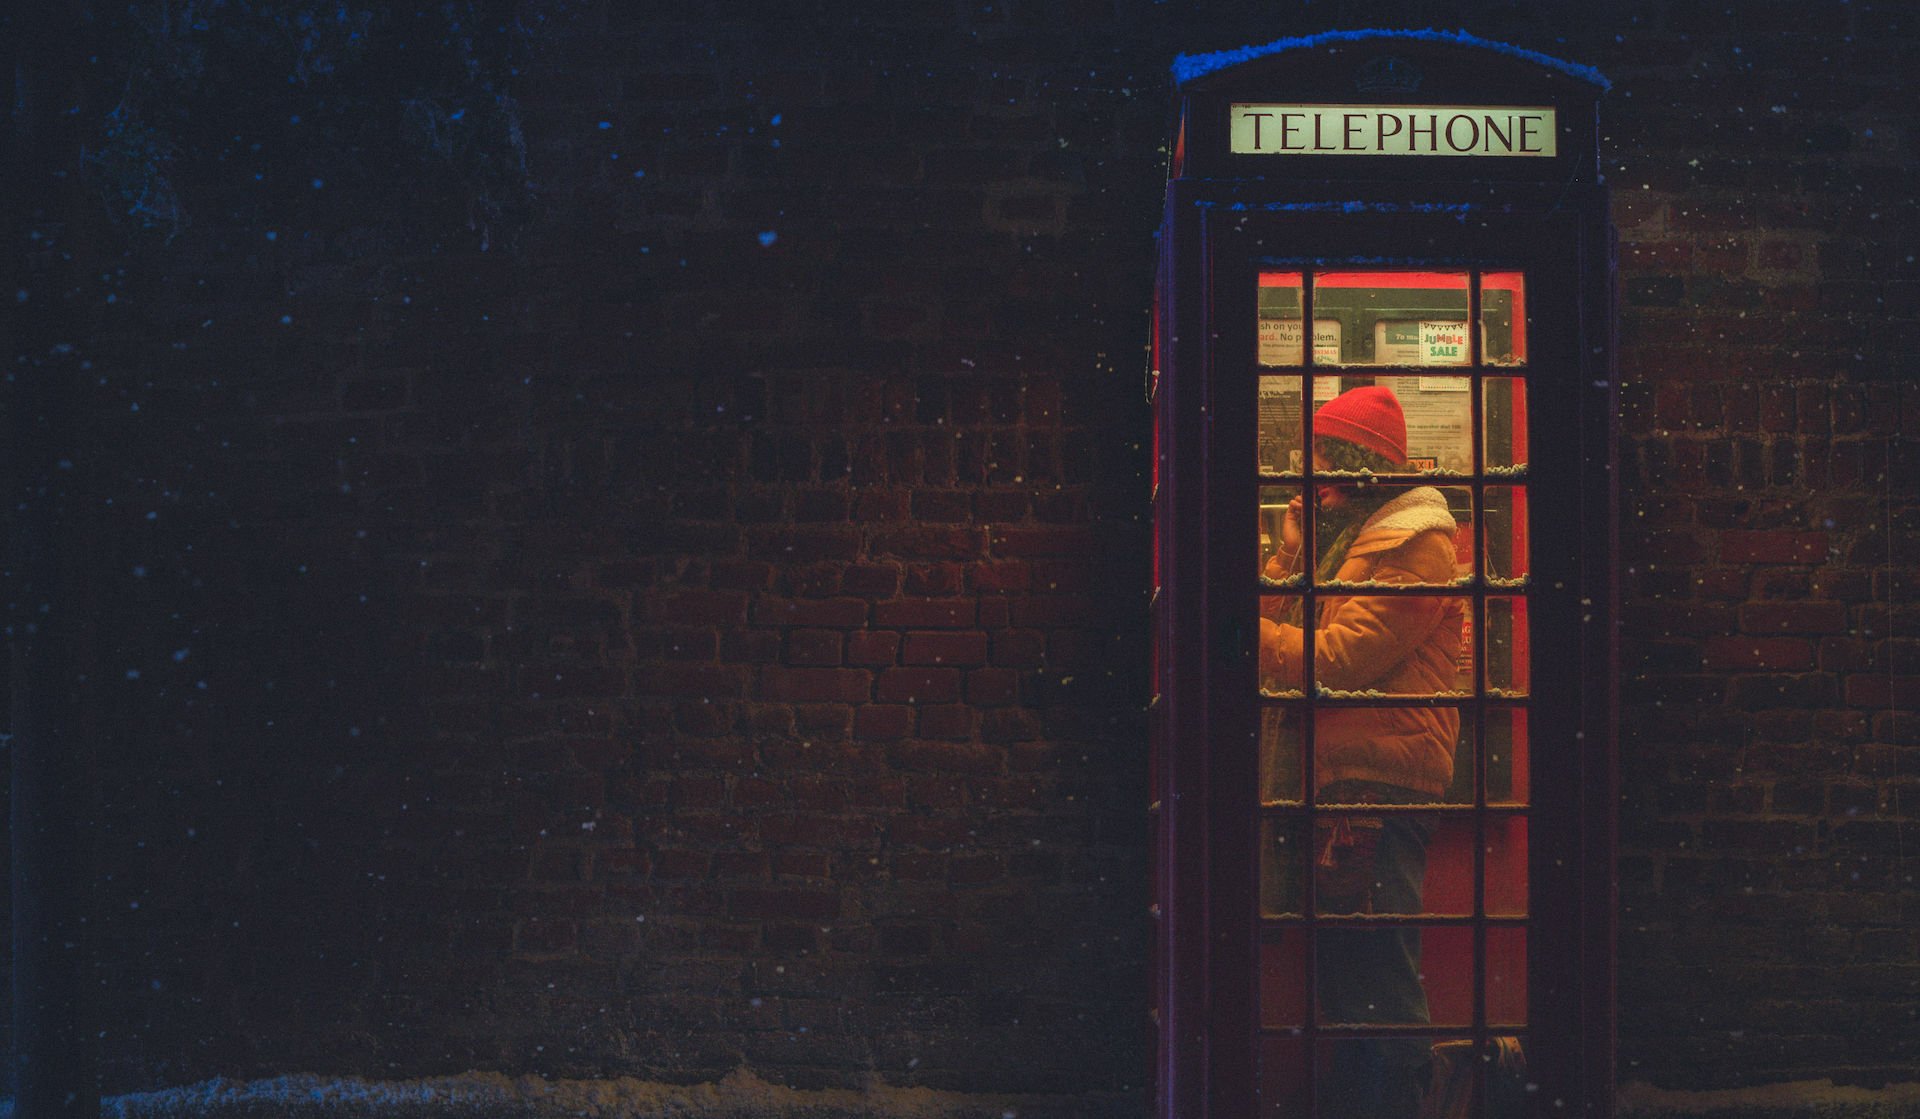 A girl with a red beanie stands in a British phone box at night in the snow.